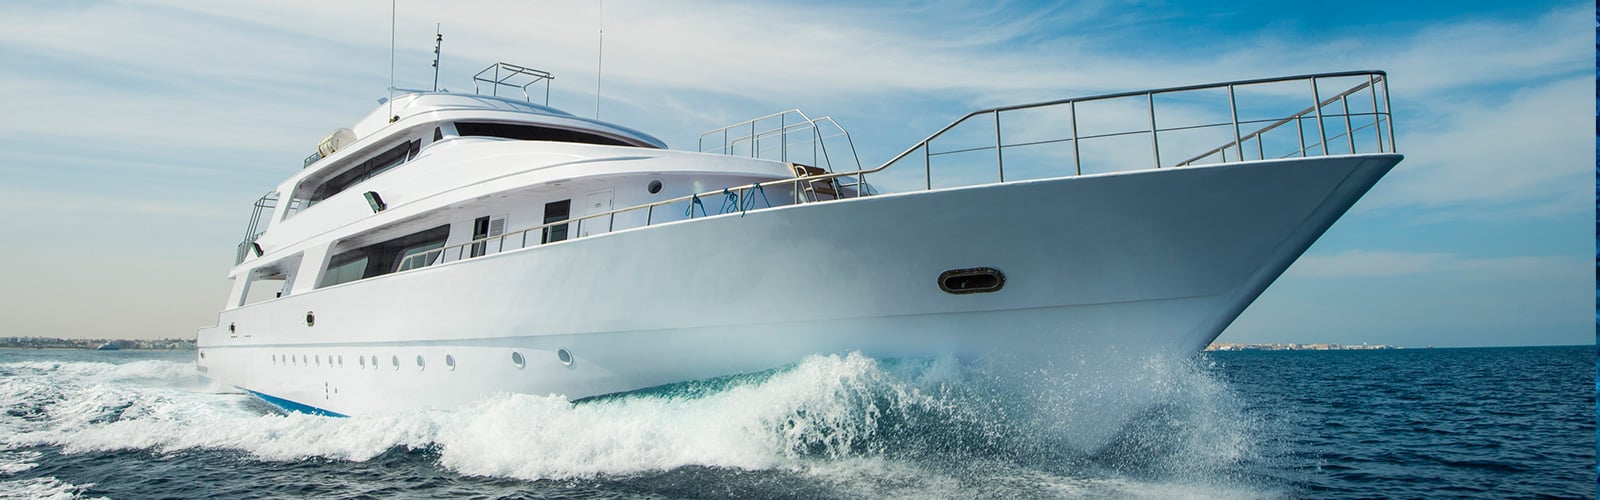 Cabo Yachts, Luxury Charter Boats in Cabo San Lucas, MX